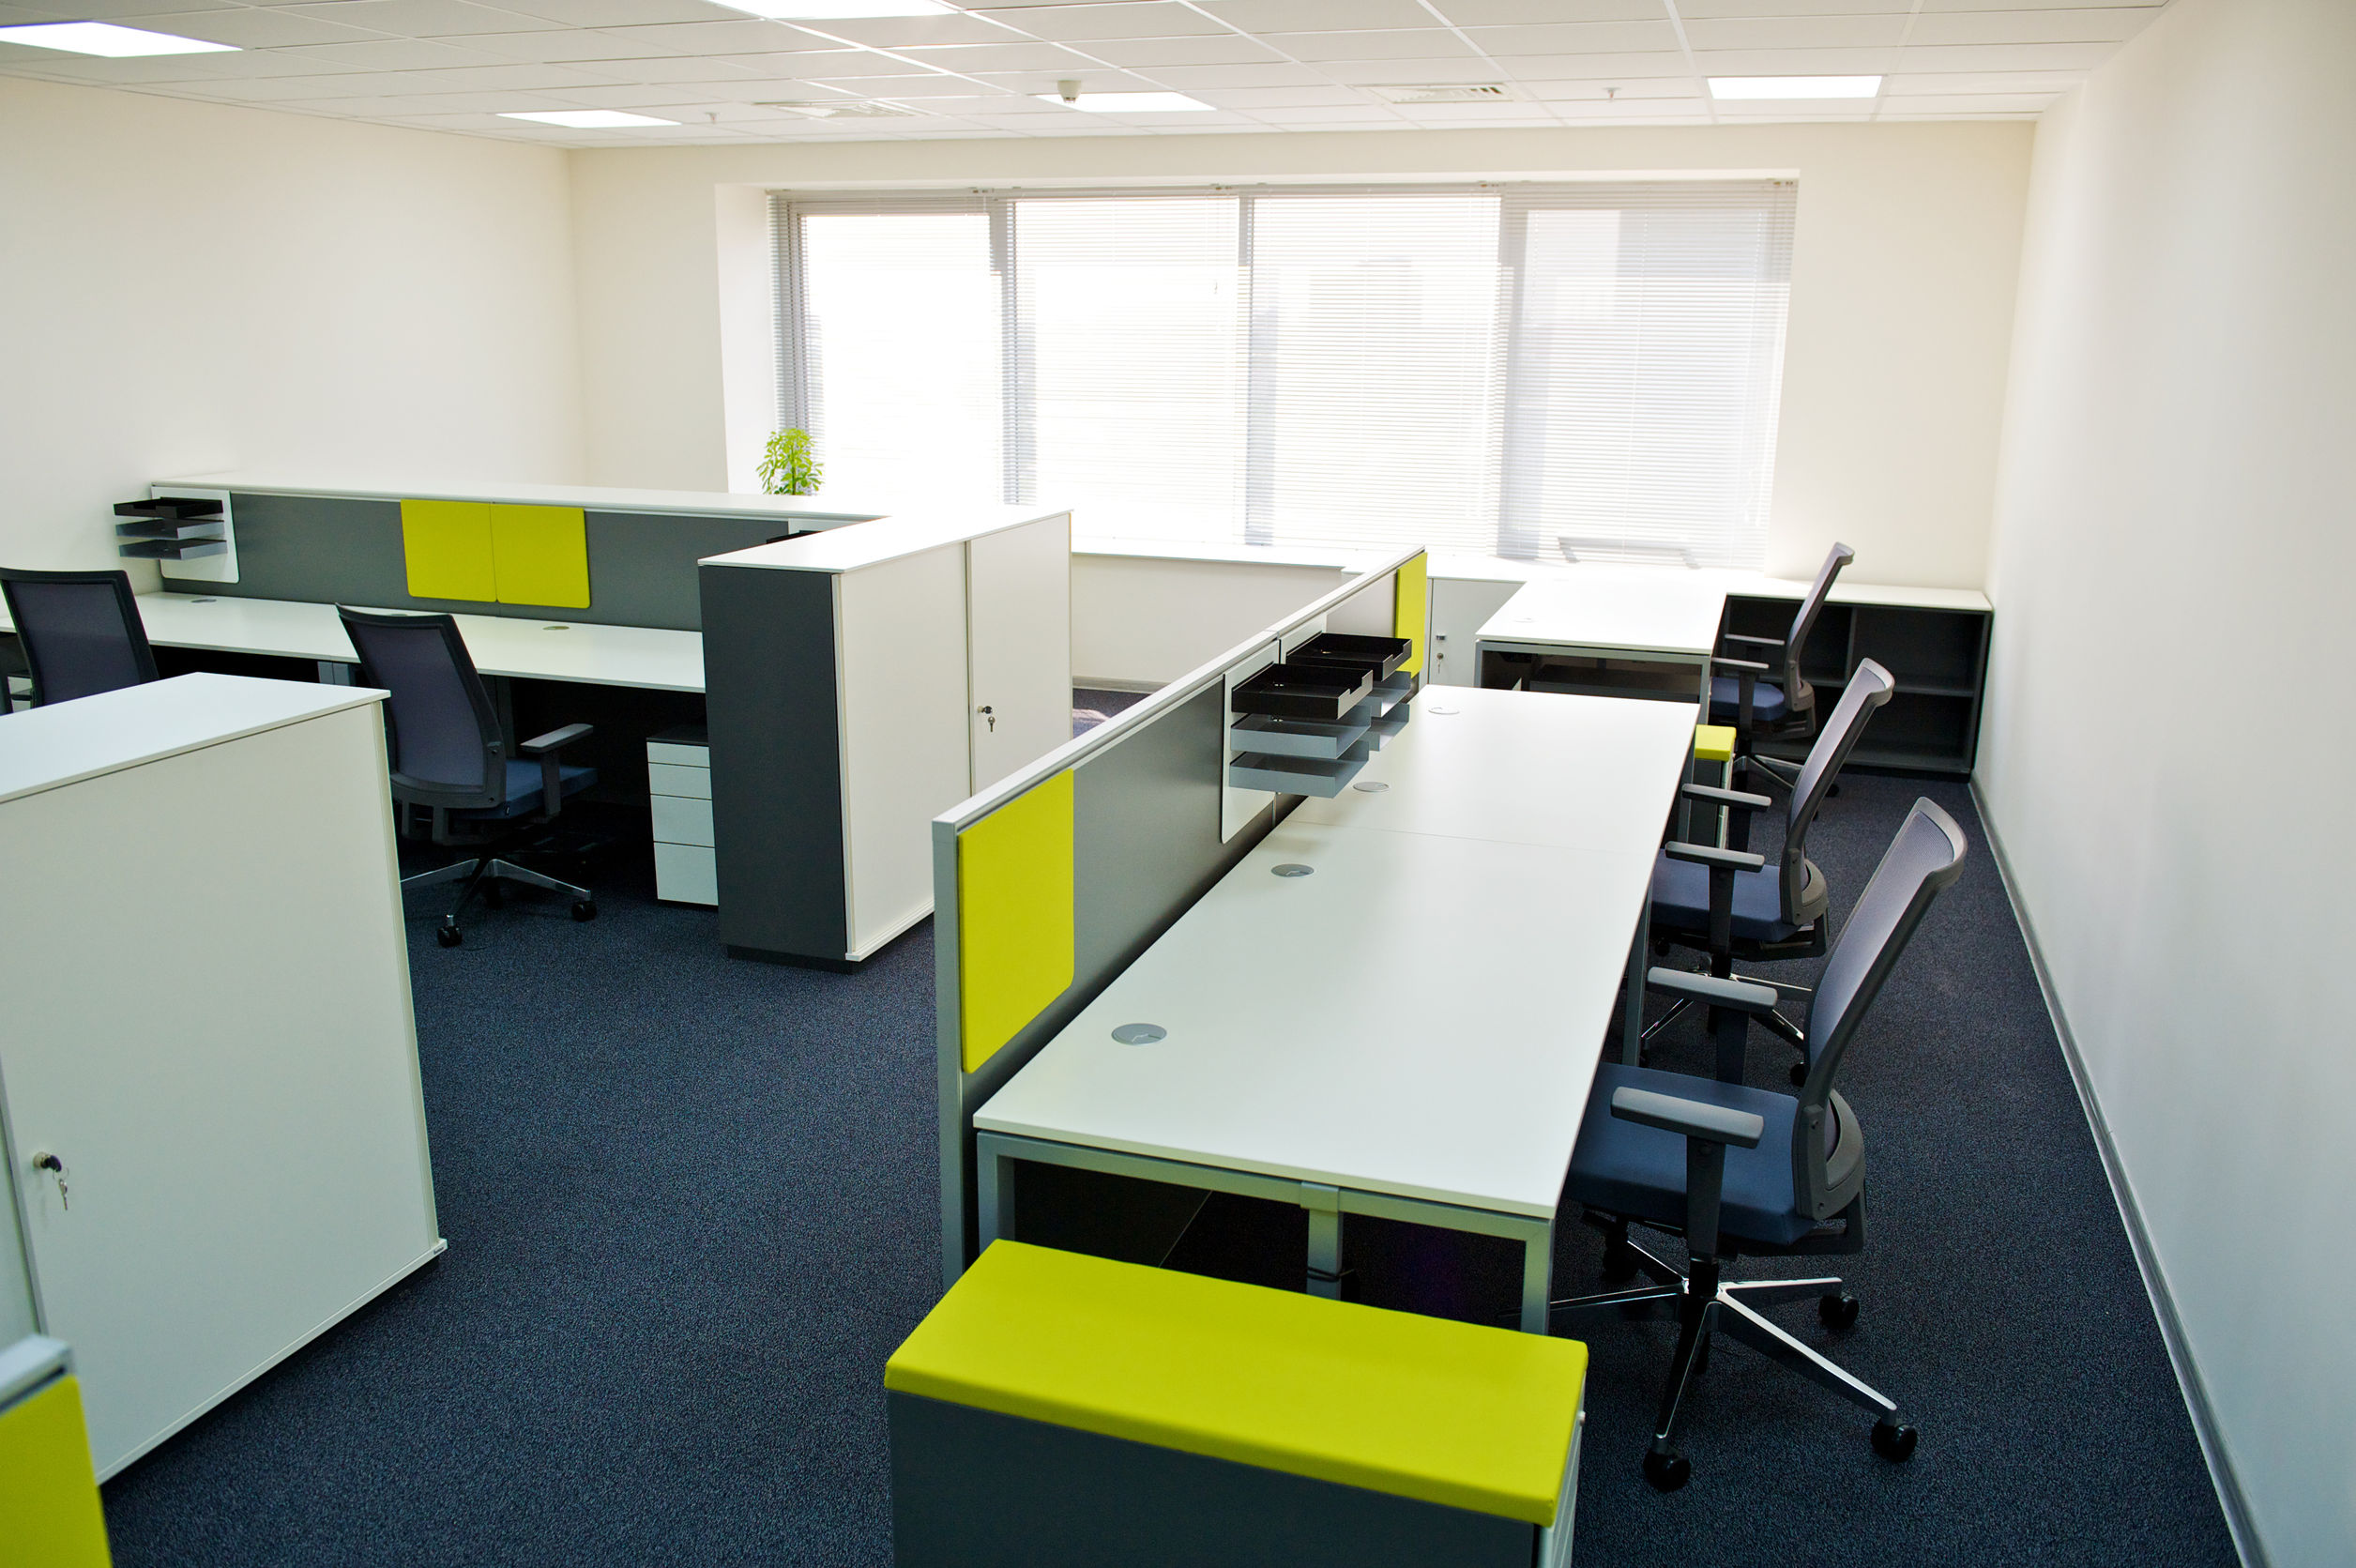 The Essentials of Office Furniture Selection